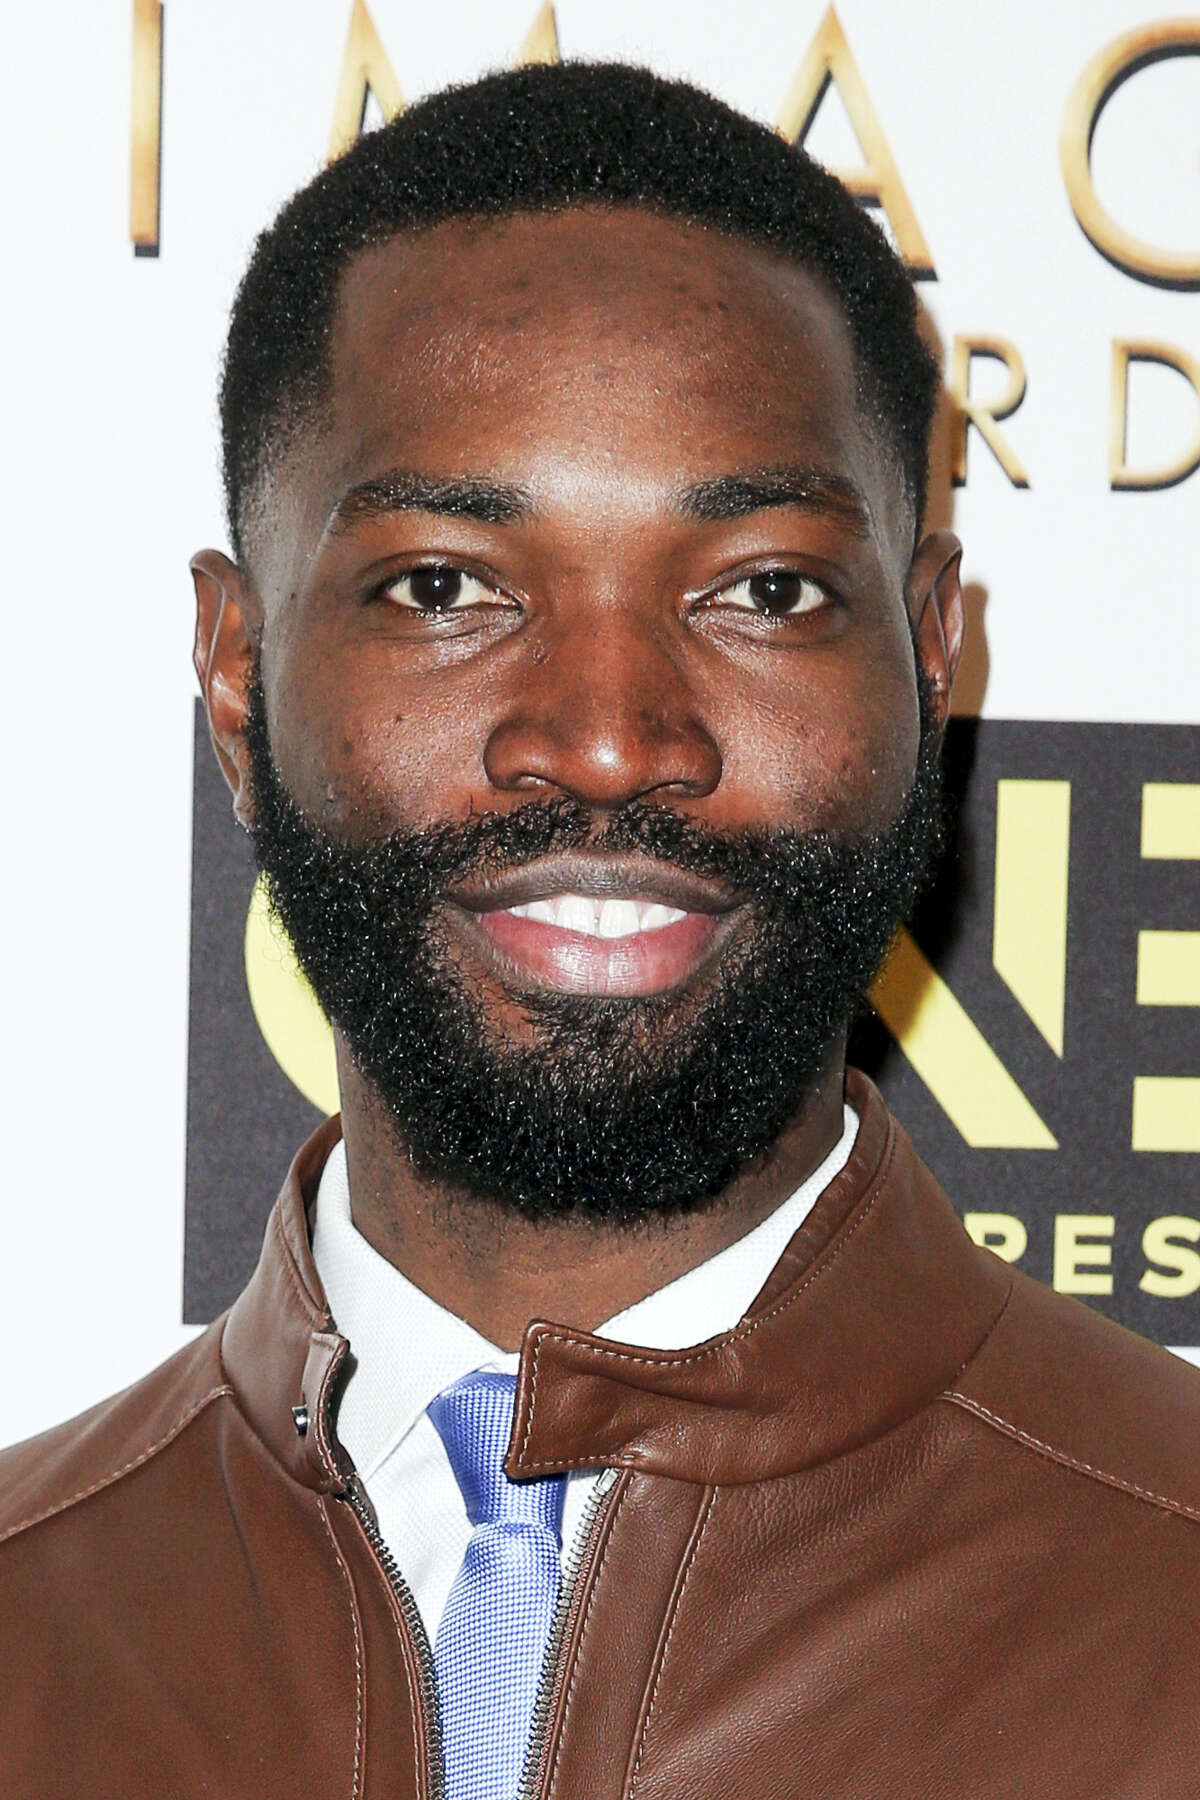 In this Jan. 28, 2017 photo, Tarell Alvin McCraney arrives at the 48th NAACP Image Awards Nominees’ Luncheon at the Loews Hollywood Hotel in Los Angeles. McCraney, the playwright who inspired the Oscar-nominated movie “Moonlight” won a prize from PEN America, the award for best mid-career playwright, PEN announced on Feb. 22, 2017.